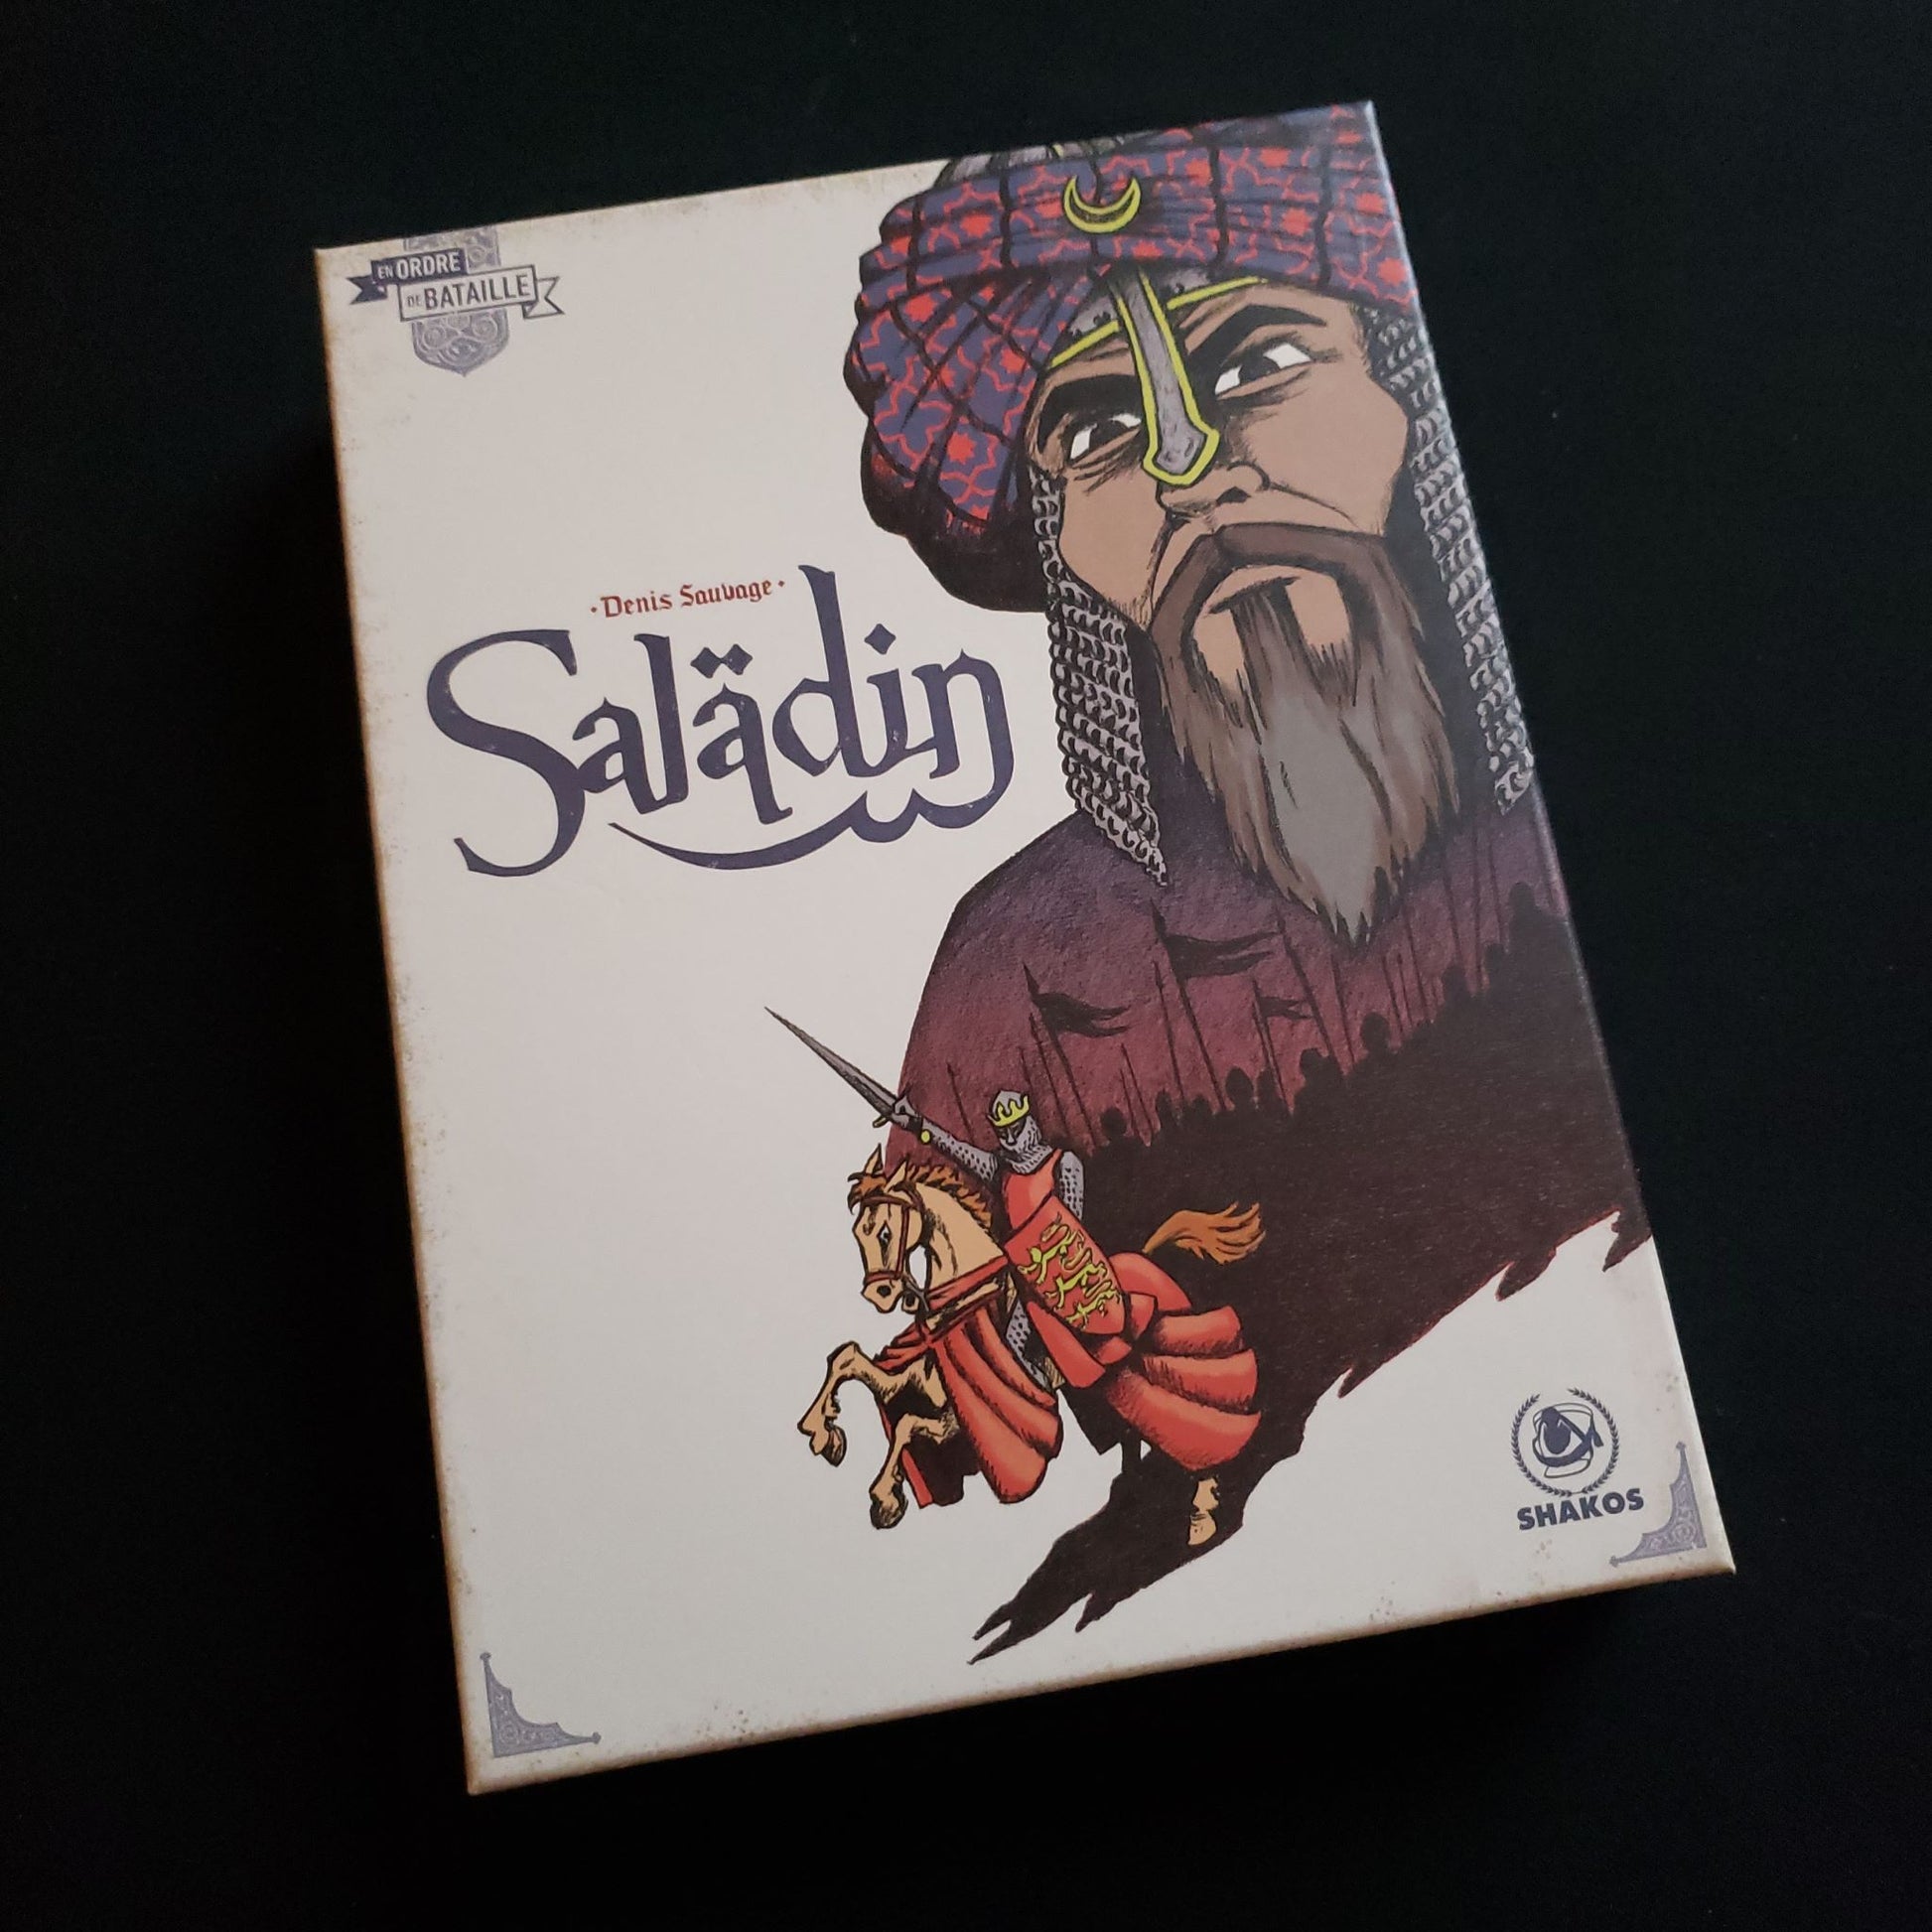 Saladin board game - front cover of box